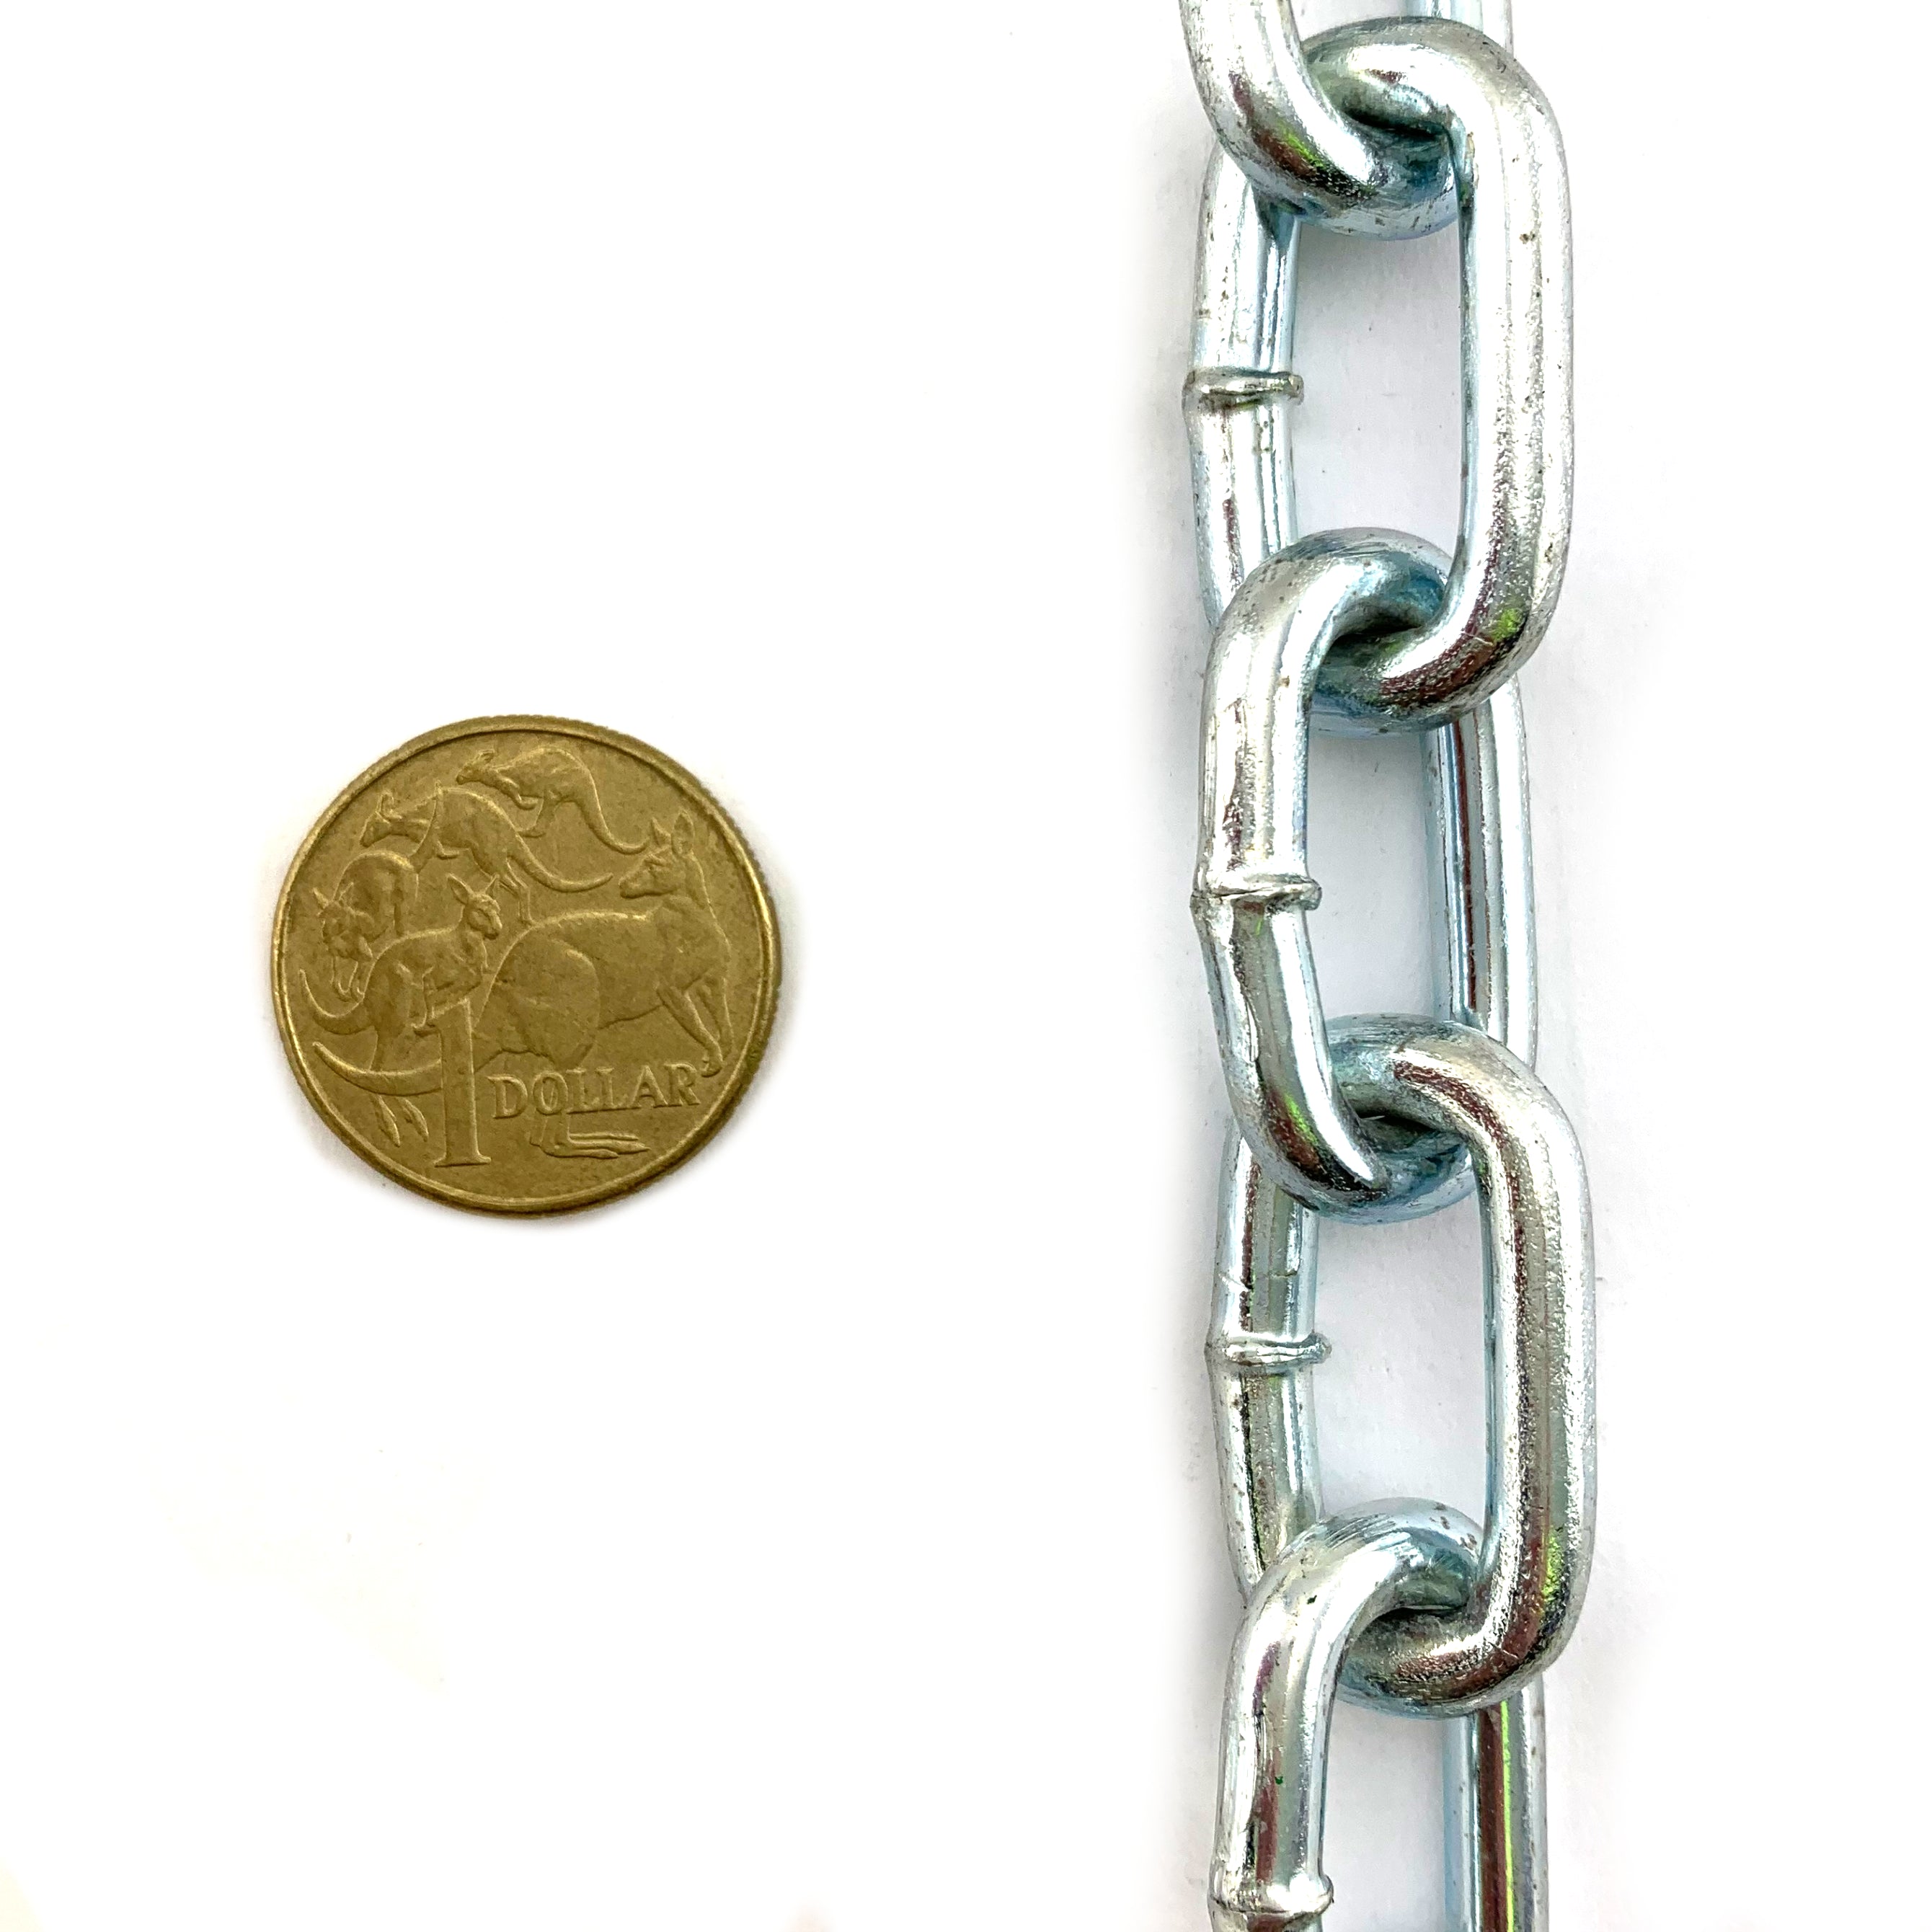 5mm zinc plated welded link chain. Order by the metre or bulk 25kg bucket. Australia wide delivery. Shop chain online chain.com.au